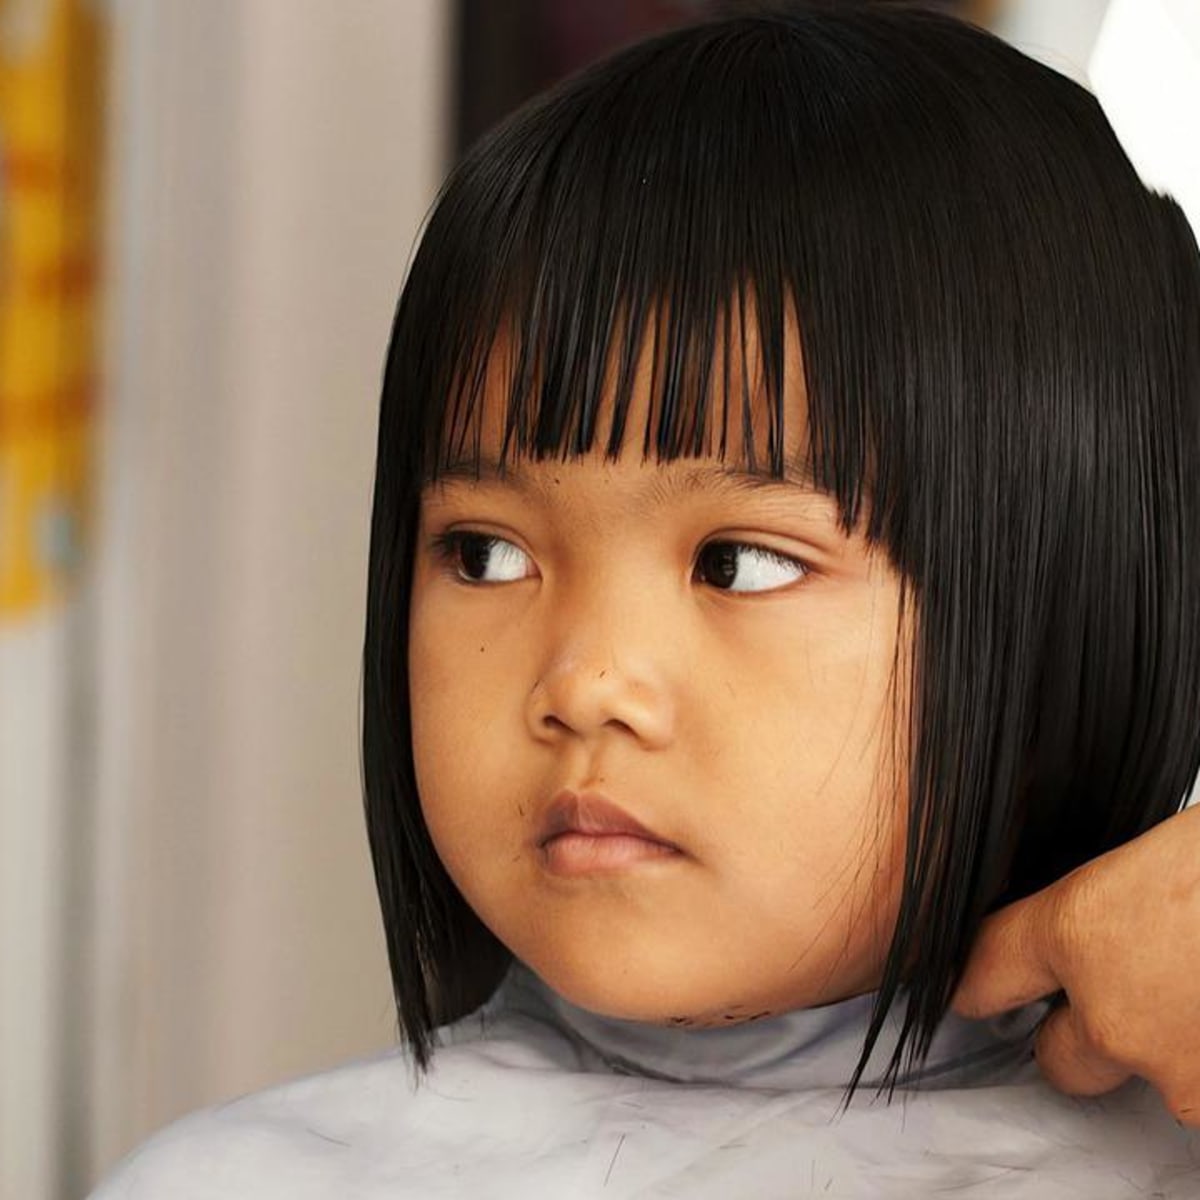 How to cut a simple bob cut for little girls, an easy-care hairstyle